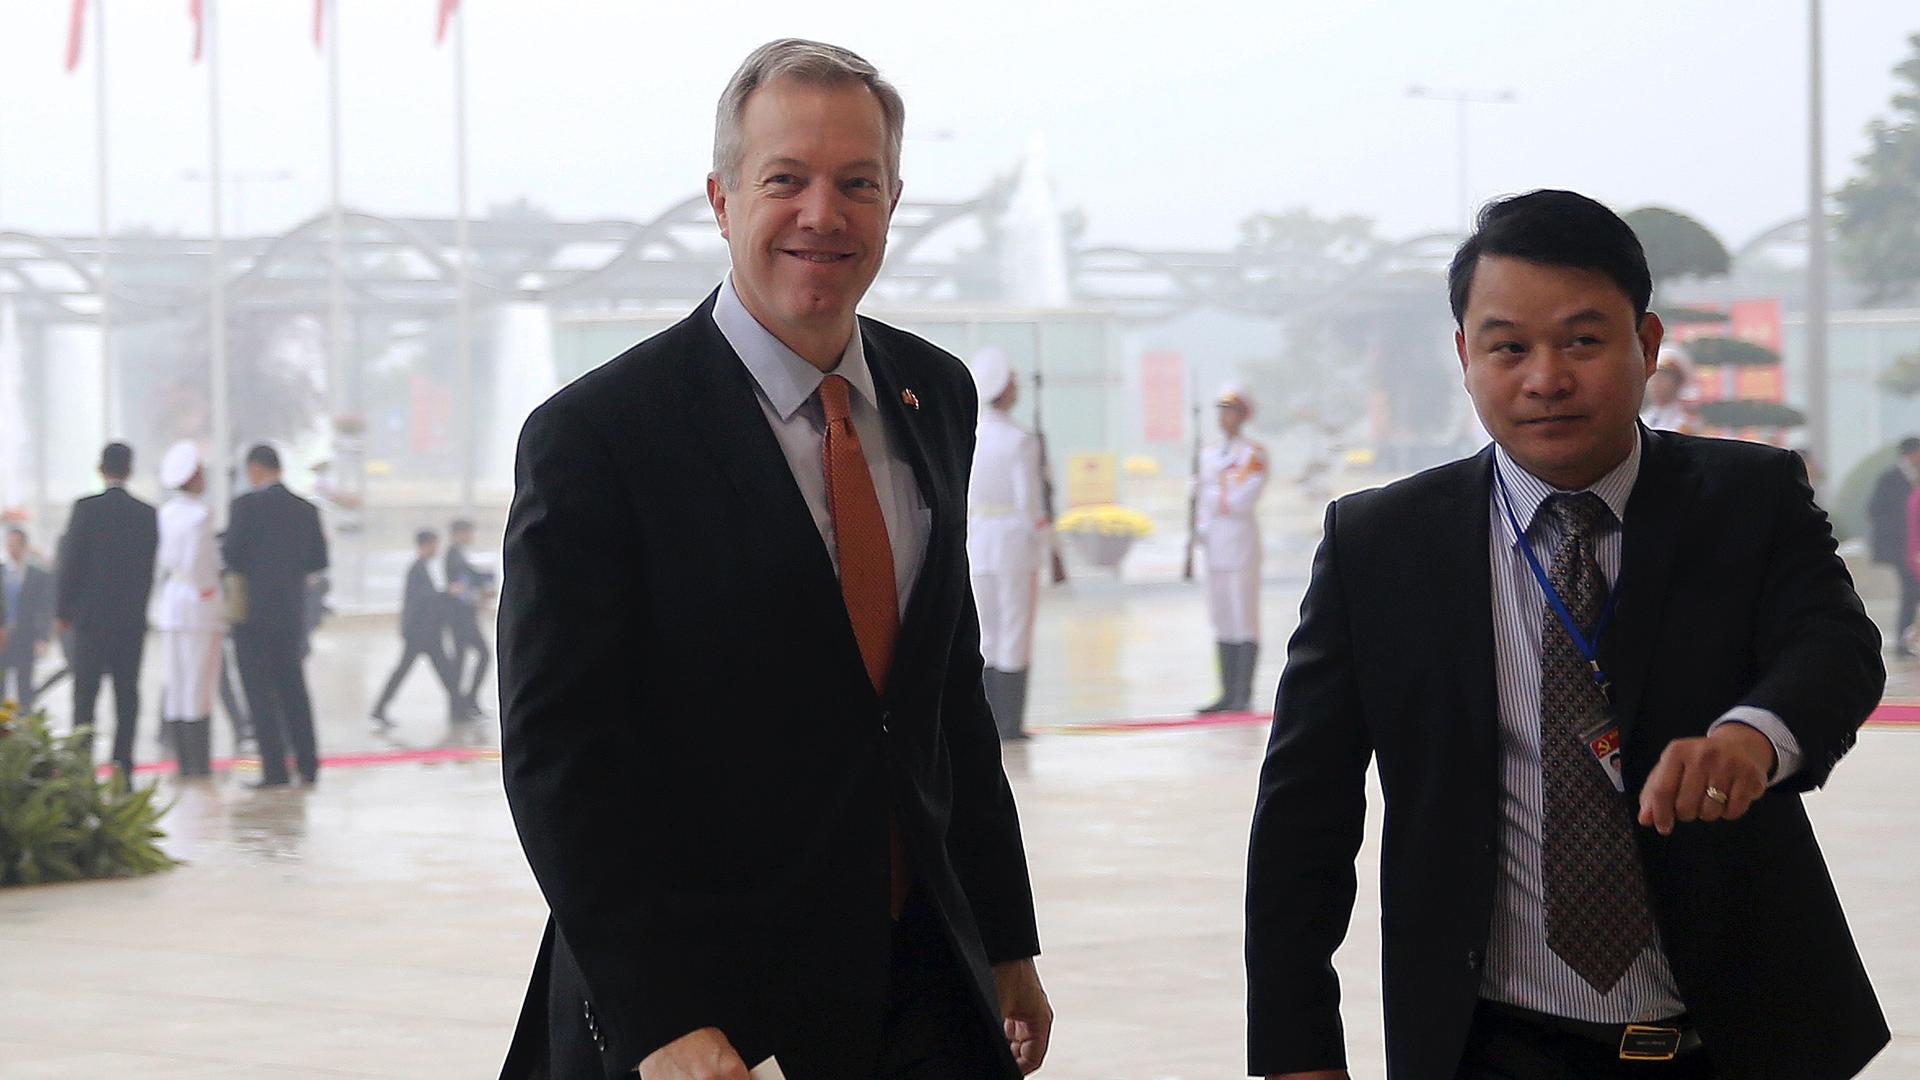 Former US Ambassador to Vietnam Ted Osius, left, arrives for the opening ceremony of the Communist Party of Vietnam's 12th Congress in Hanoi, Vietnam, Jan. 21, 2016. 